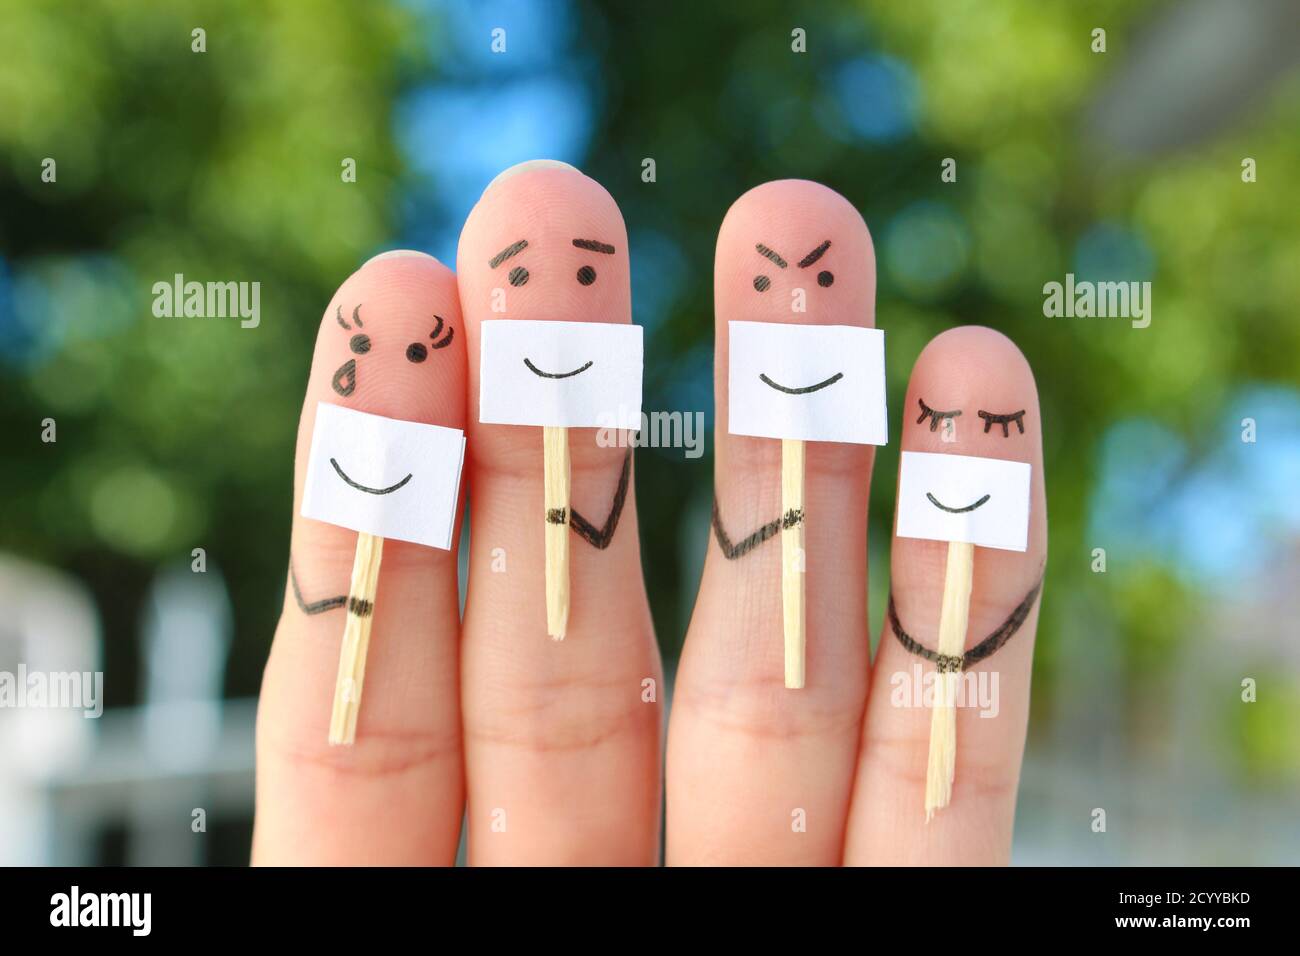 Fingers art of family. Concept of people hiding emotions. Stock Photo